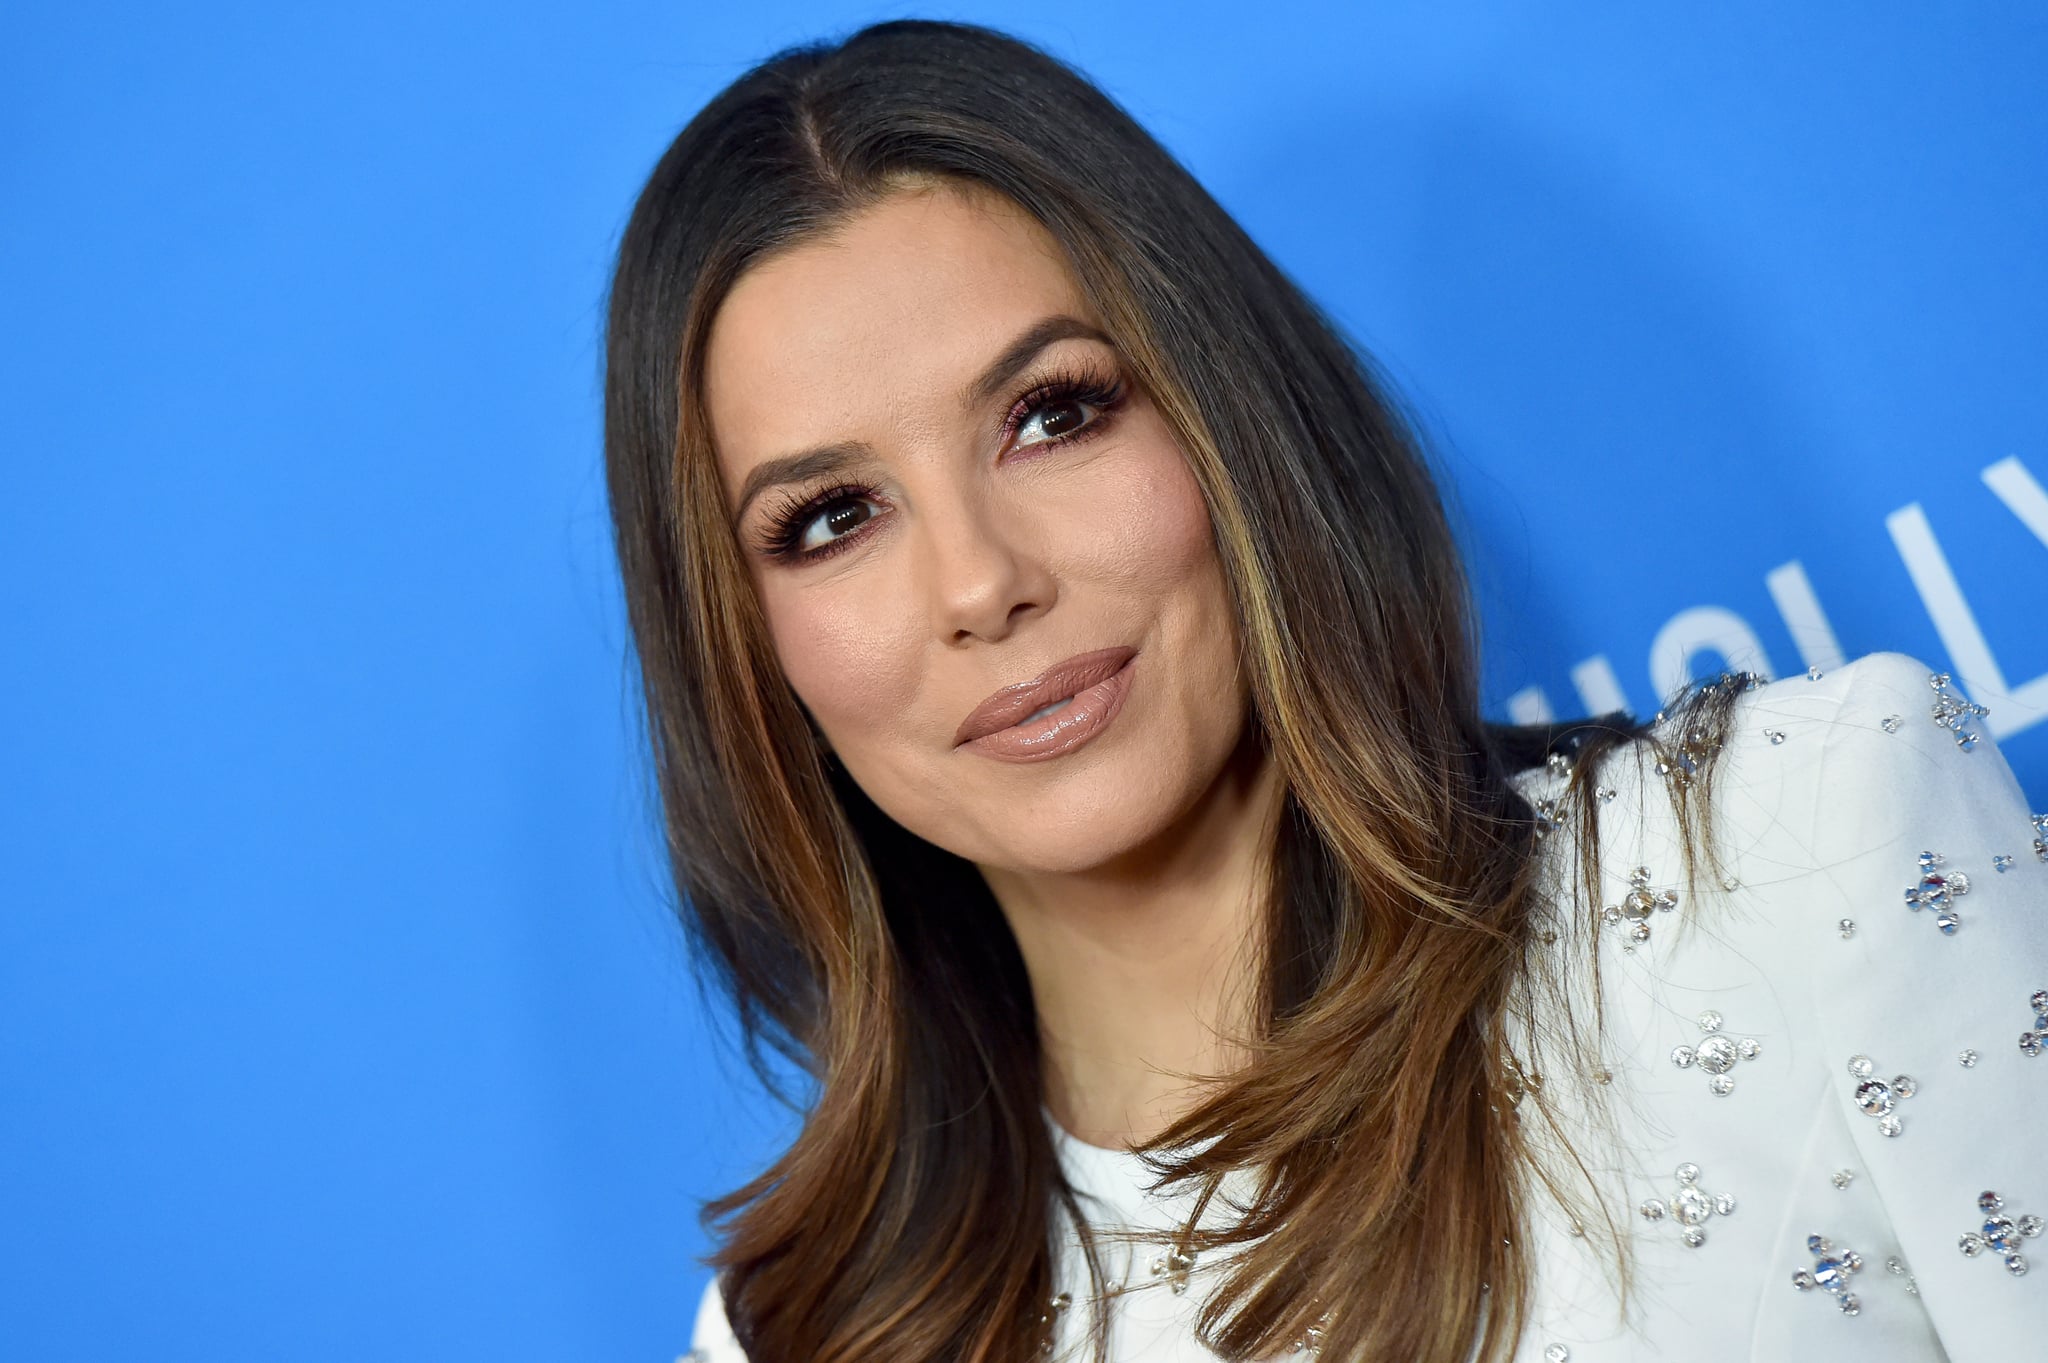 BEVERLY HILLS, CALIFORNIA - JULY 31: Eva Longoria attends the Hollywood Foreign Press Association's Annual Grants Banquet at Regent Beverly Wilshire Hotel on July 31, 2019 in Beverly Hills, California. (Photo by Axelle/Bauer-Griffin/FilmMagic)